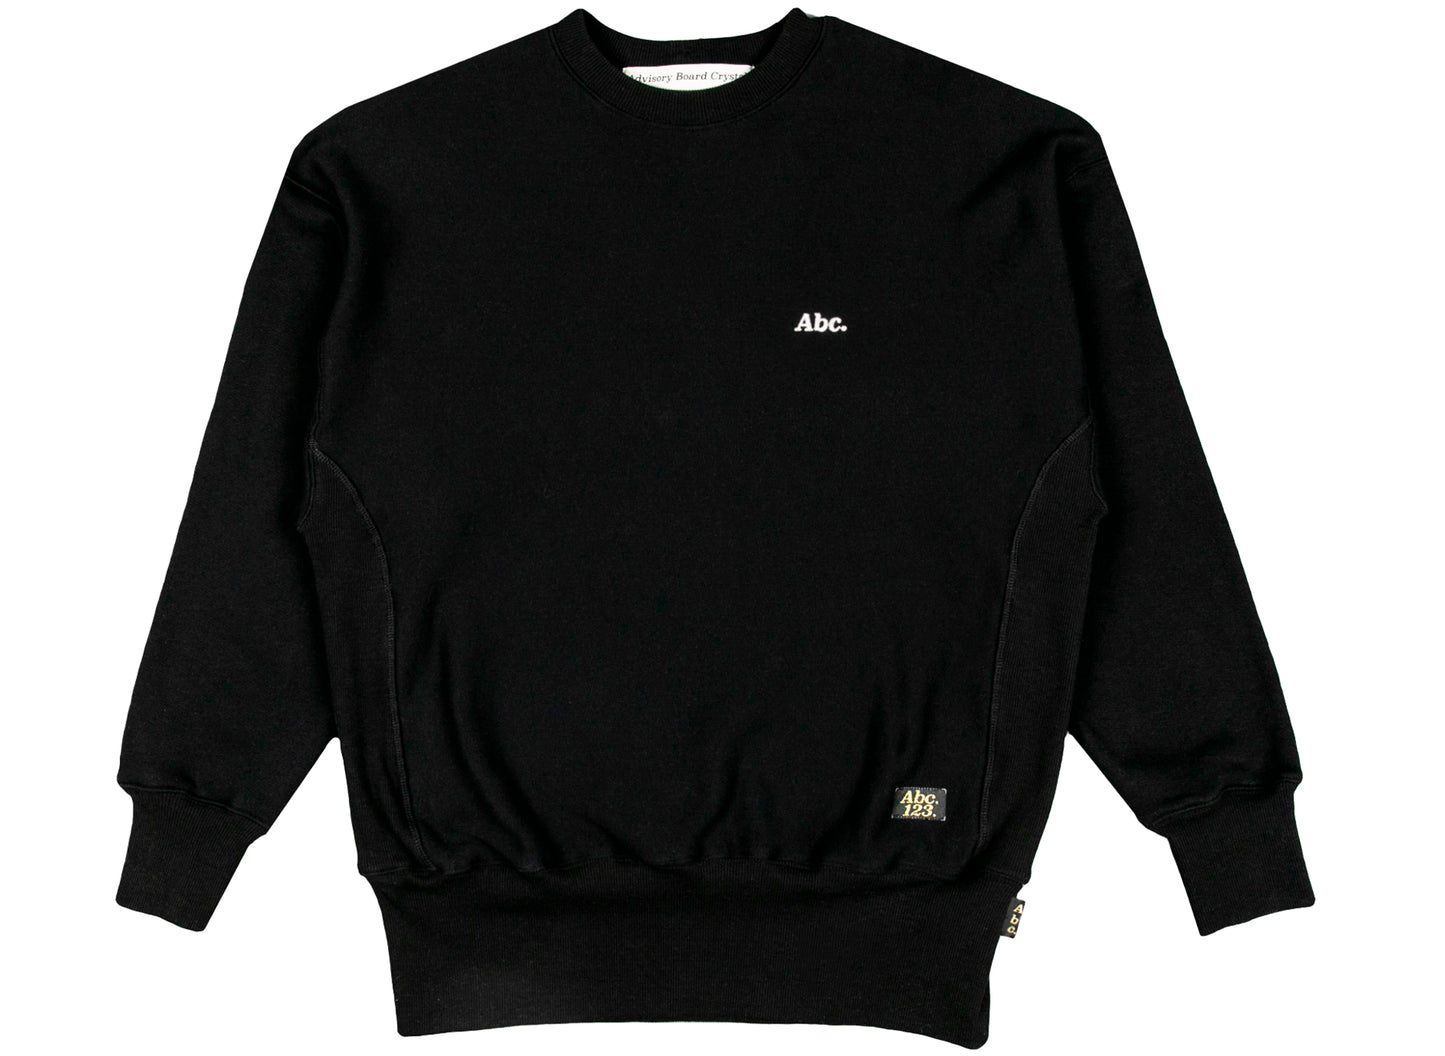 Advisory Board Crystals Abc. 123. Sweatshirt in Anthracite